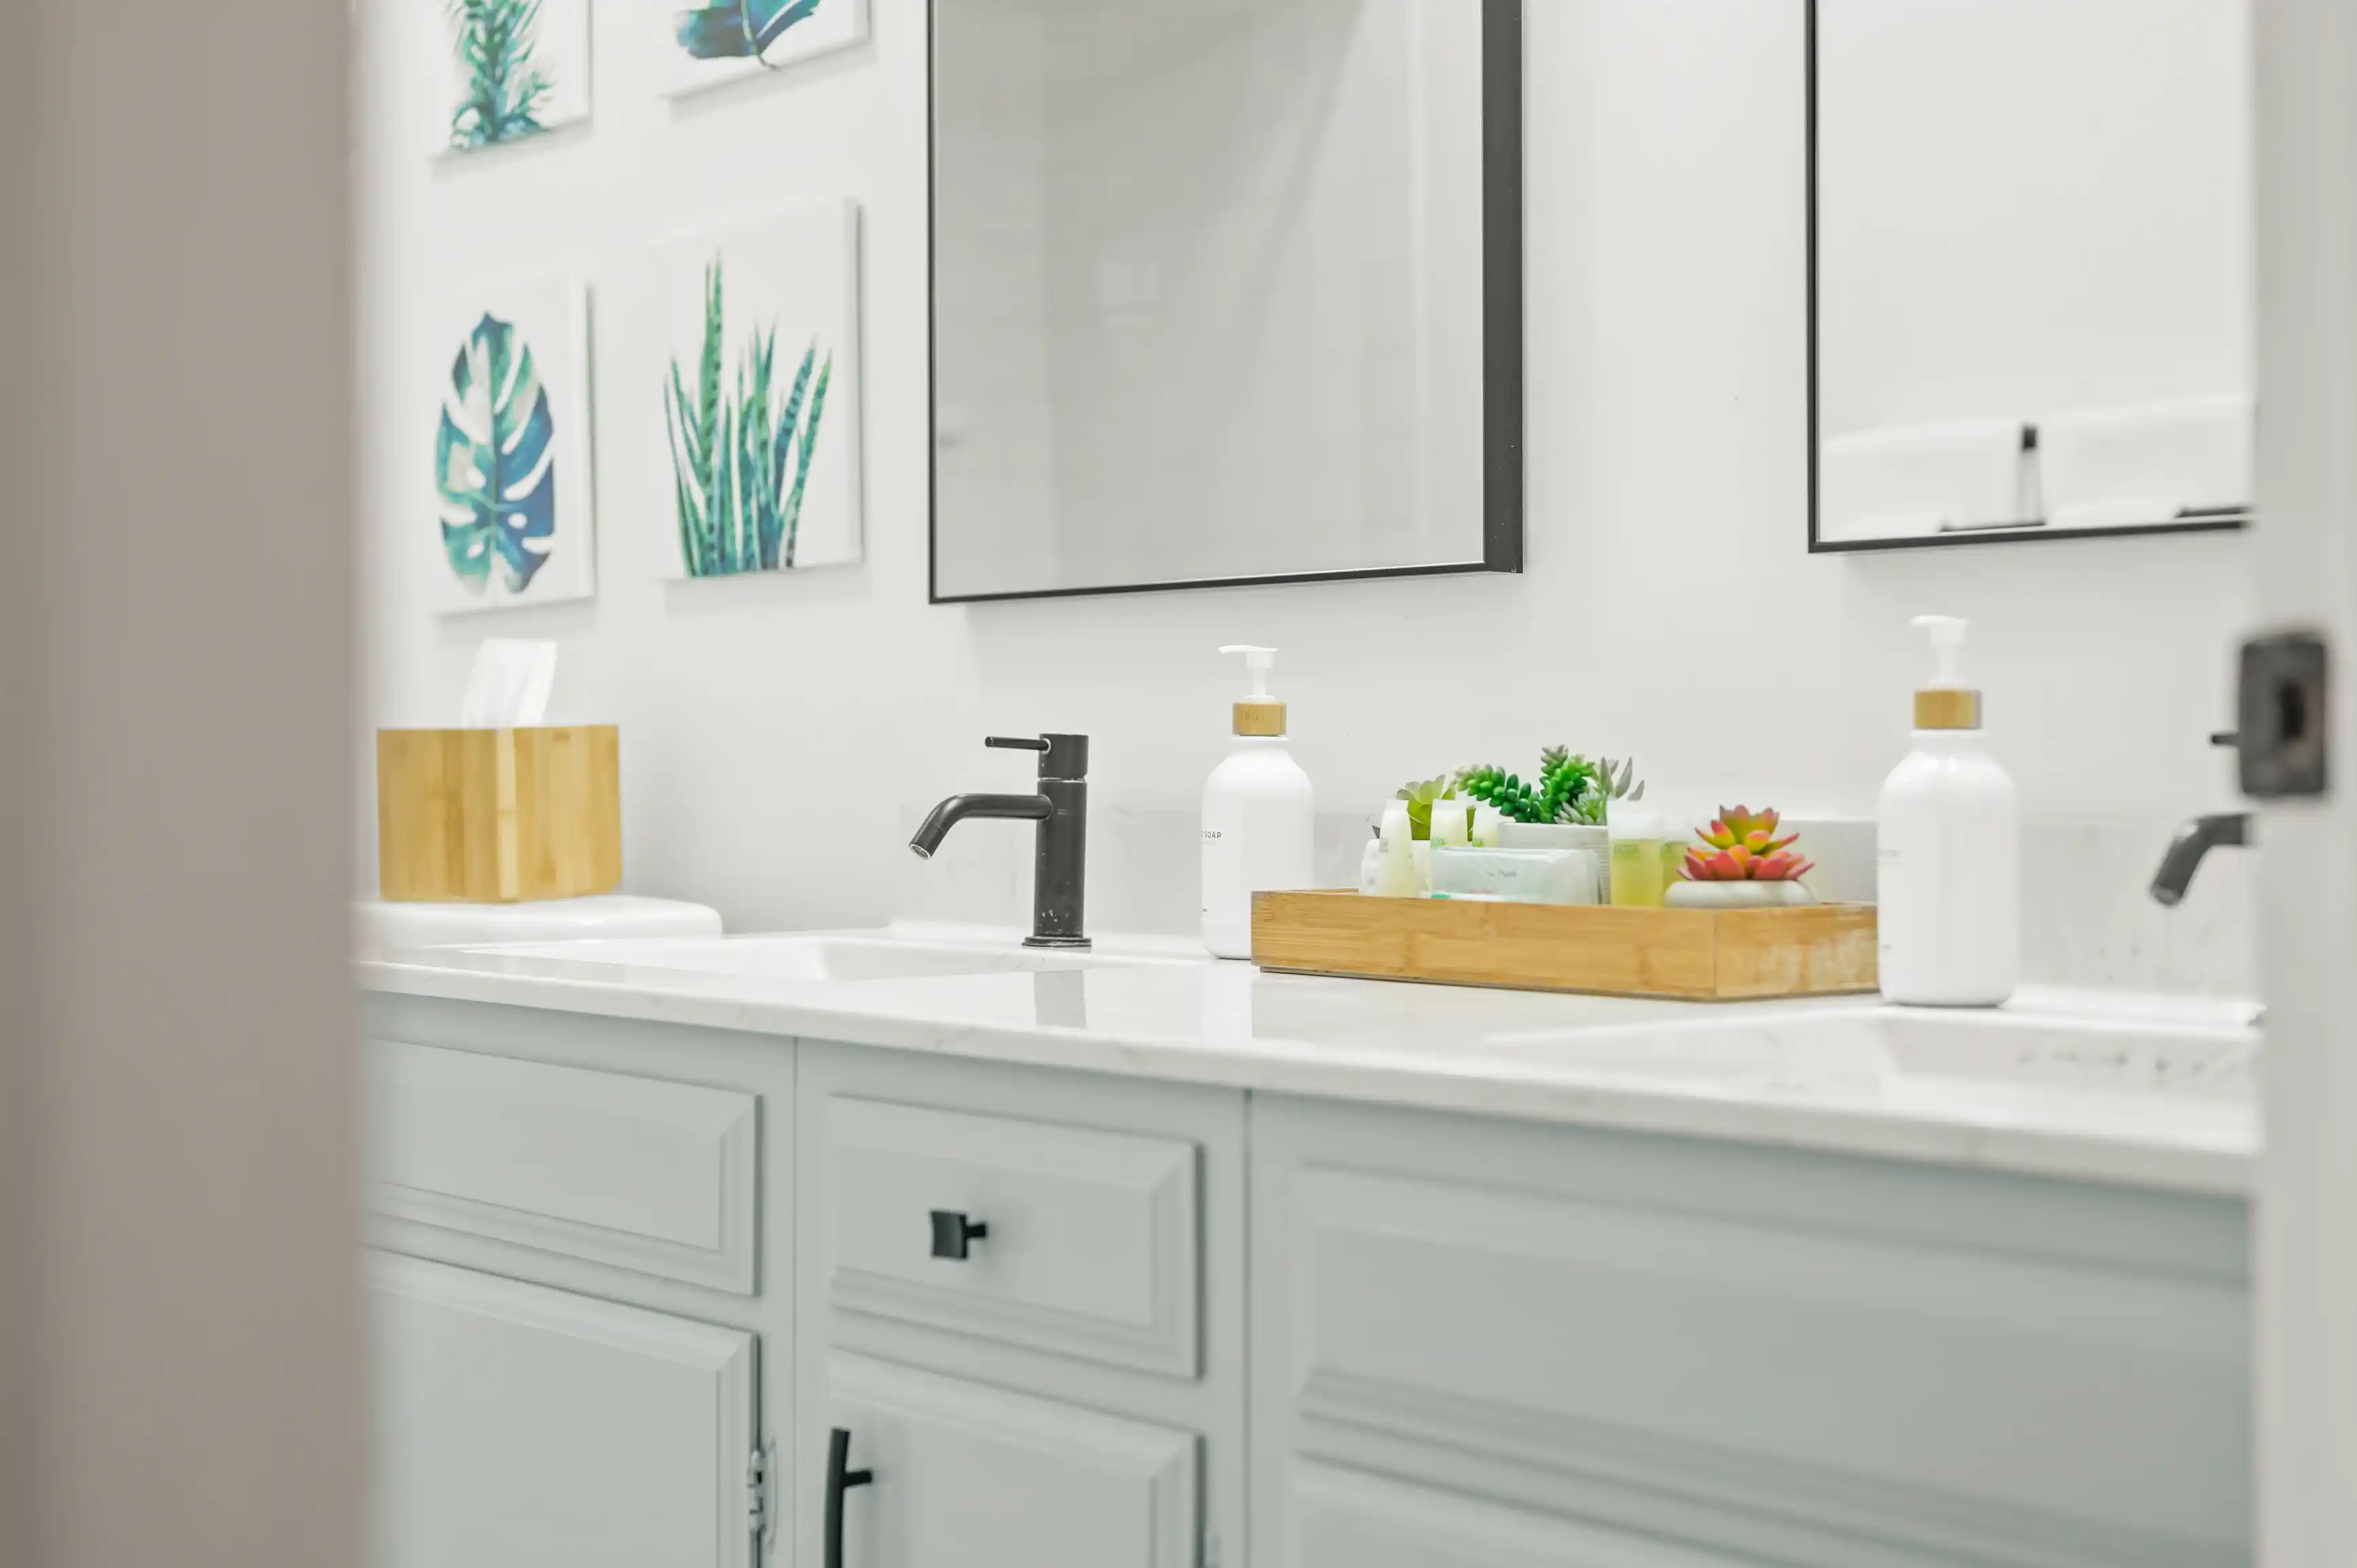 A modern bathroom vanity with a white countertop, black faucet, framed mirrors, and decorative plants.